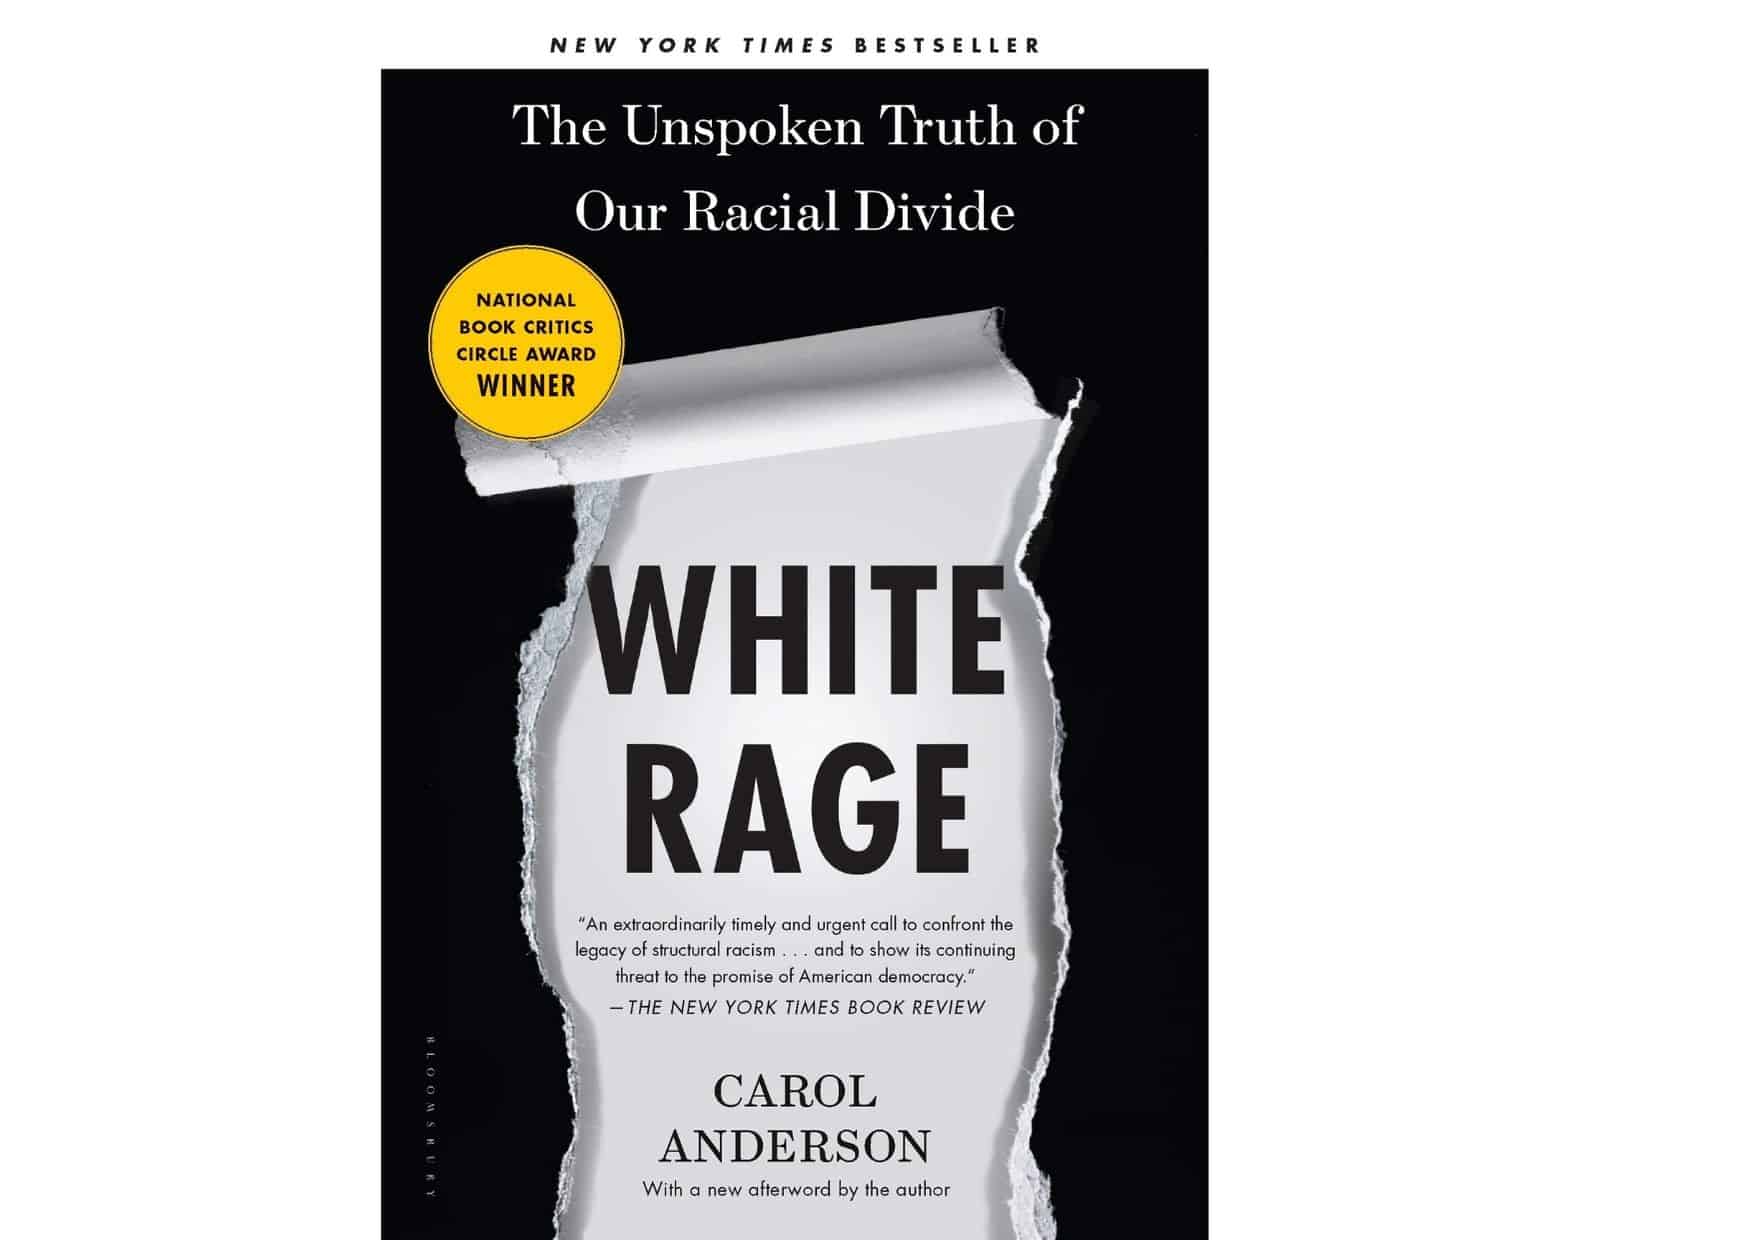 23 Books About Racism to Inspire You to Embrace Race and Do Good